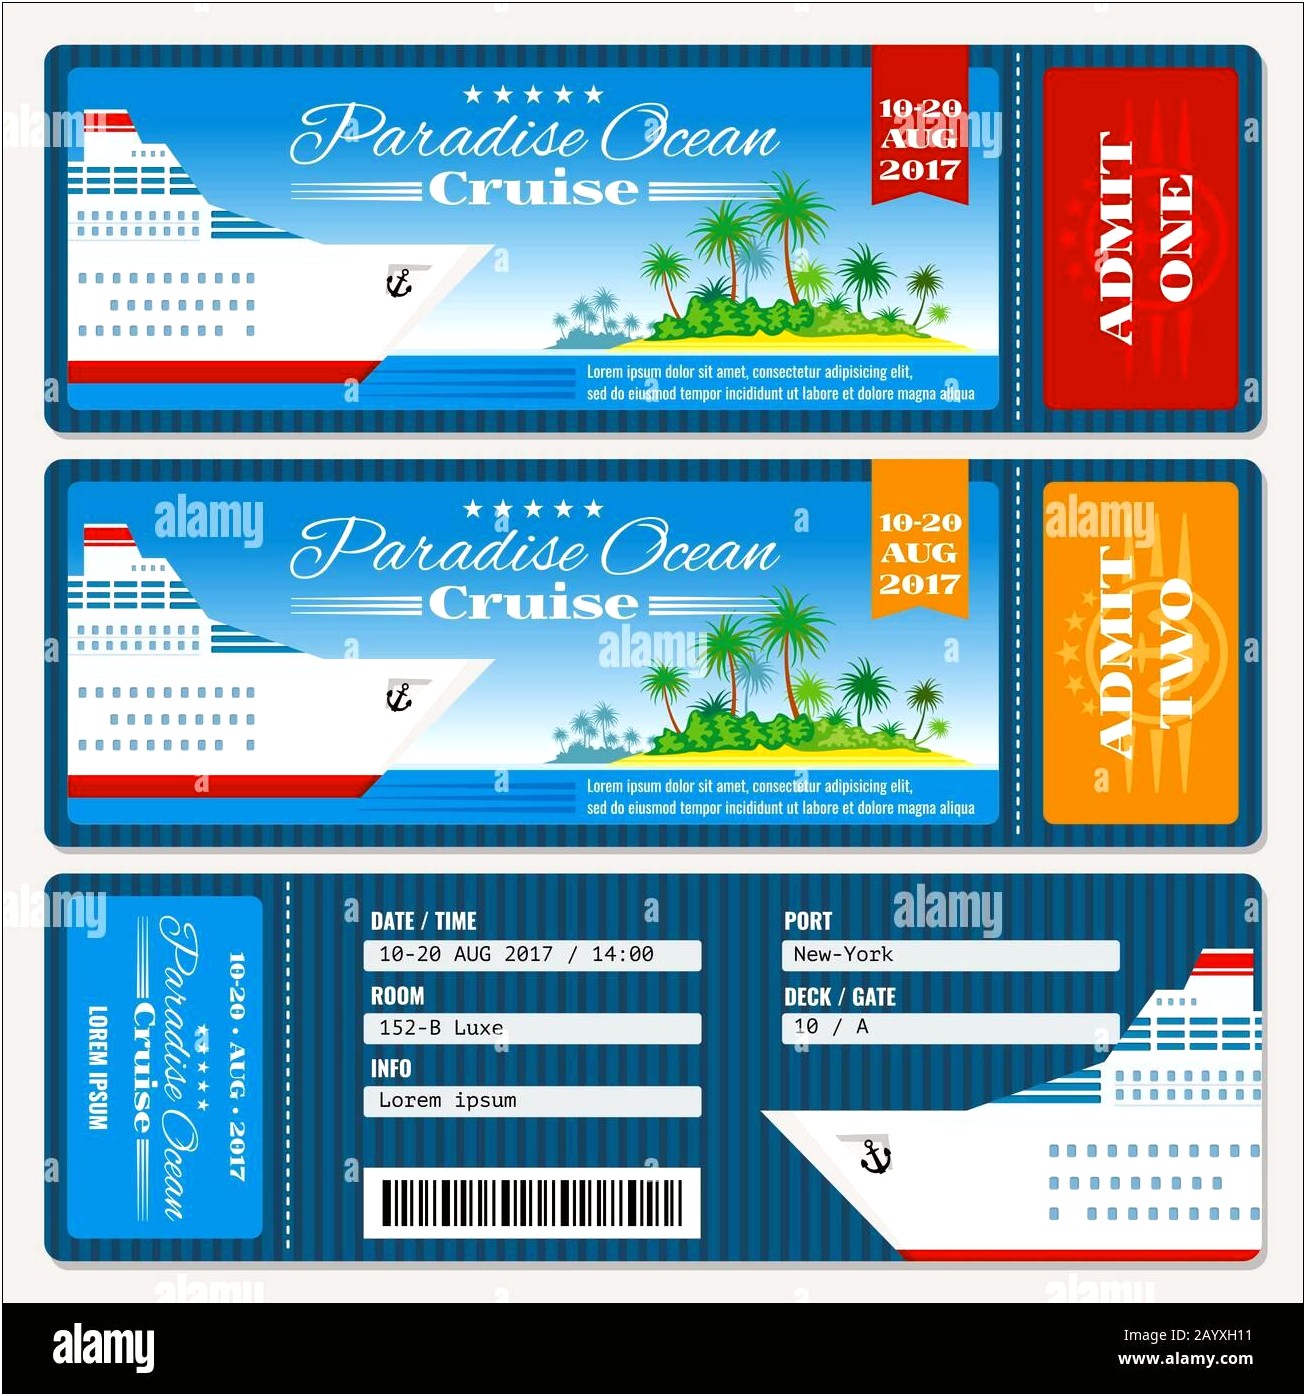 Do You Have To Print Boarding Pass For Carnival Cruise